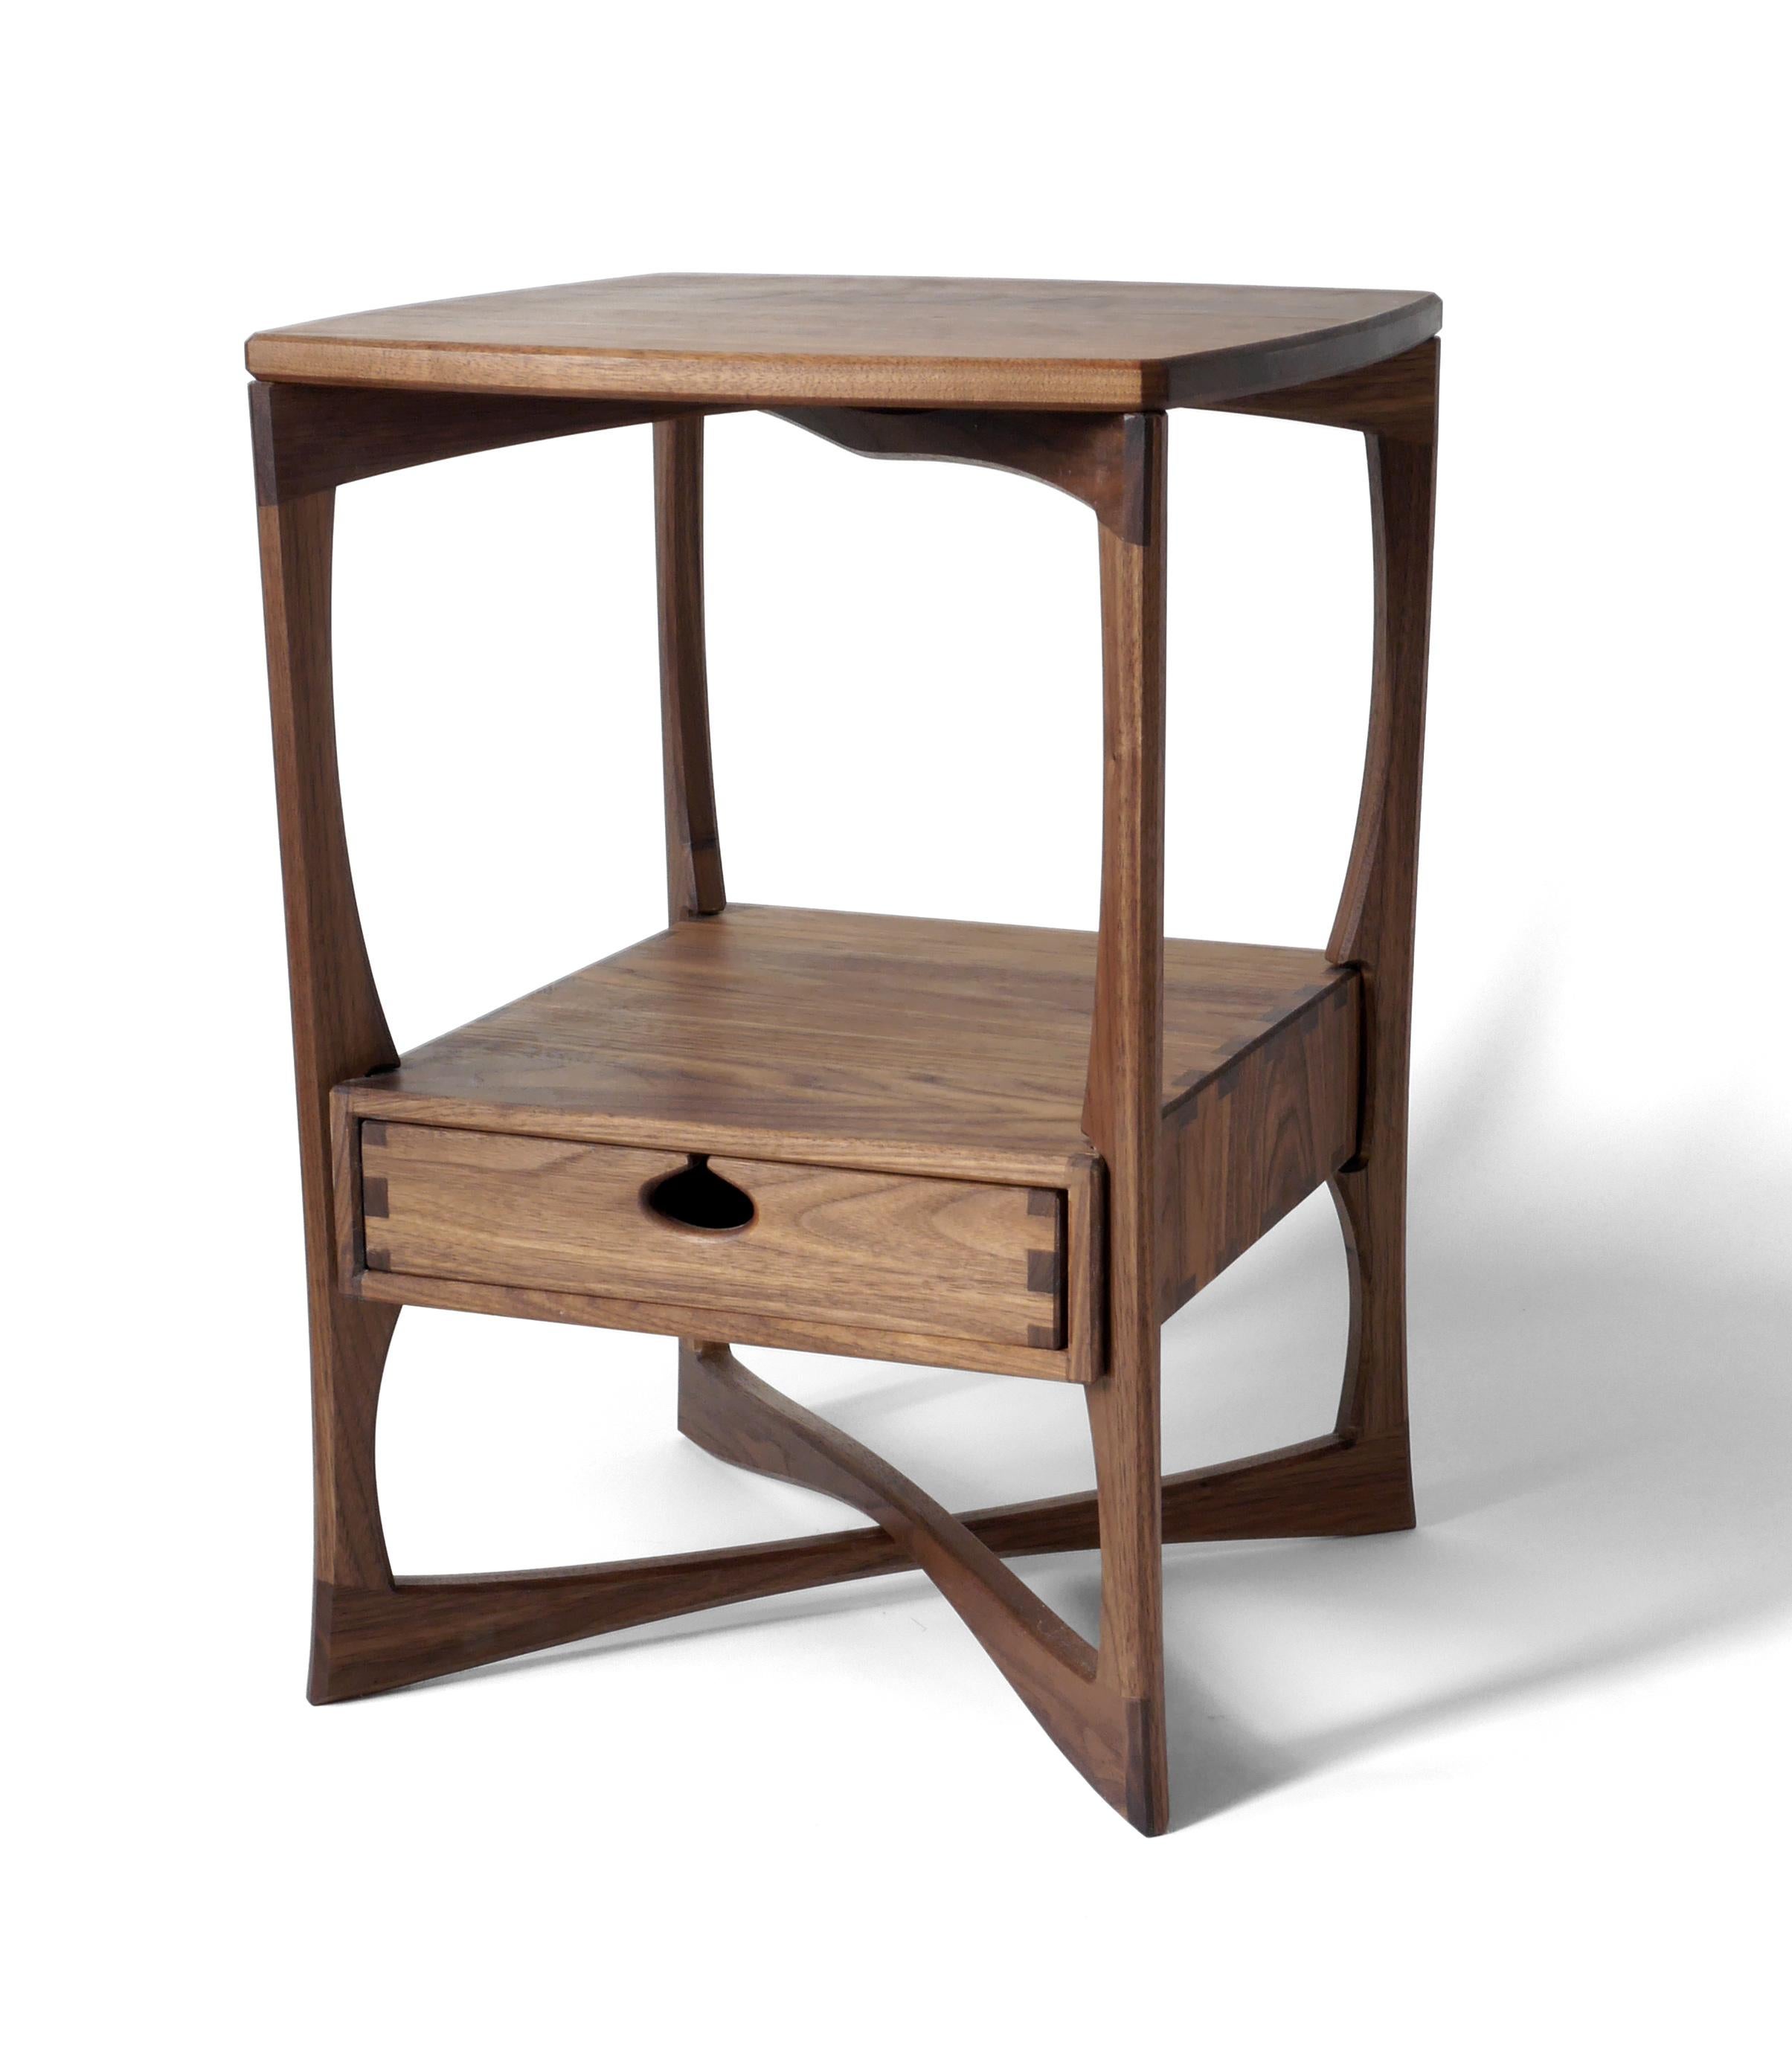 We have one of these in stock, available for immediate shipment.

The detail-rich Roke Side Table is made out of solid black walnut hardwood and has a single drawer mounted on wooden runners in a traditional drawer box. It’s built with exposed